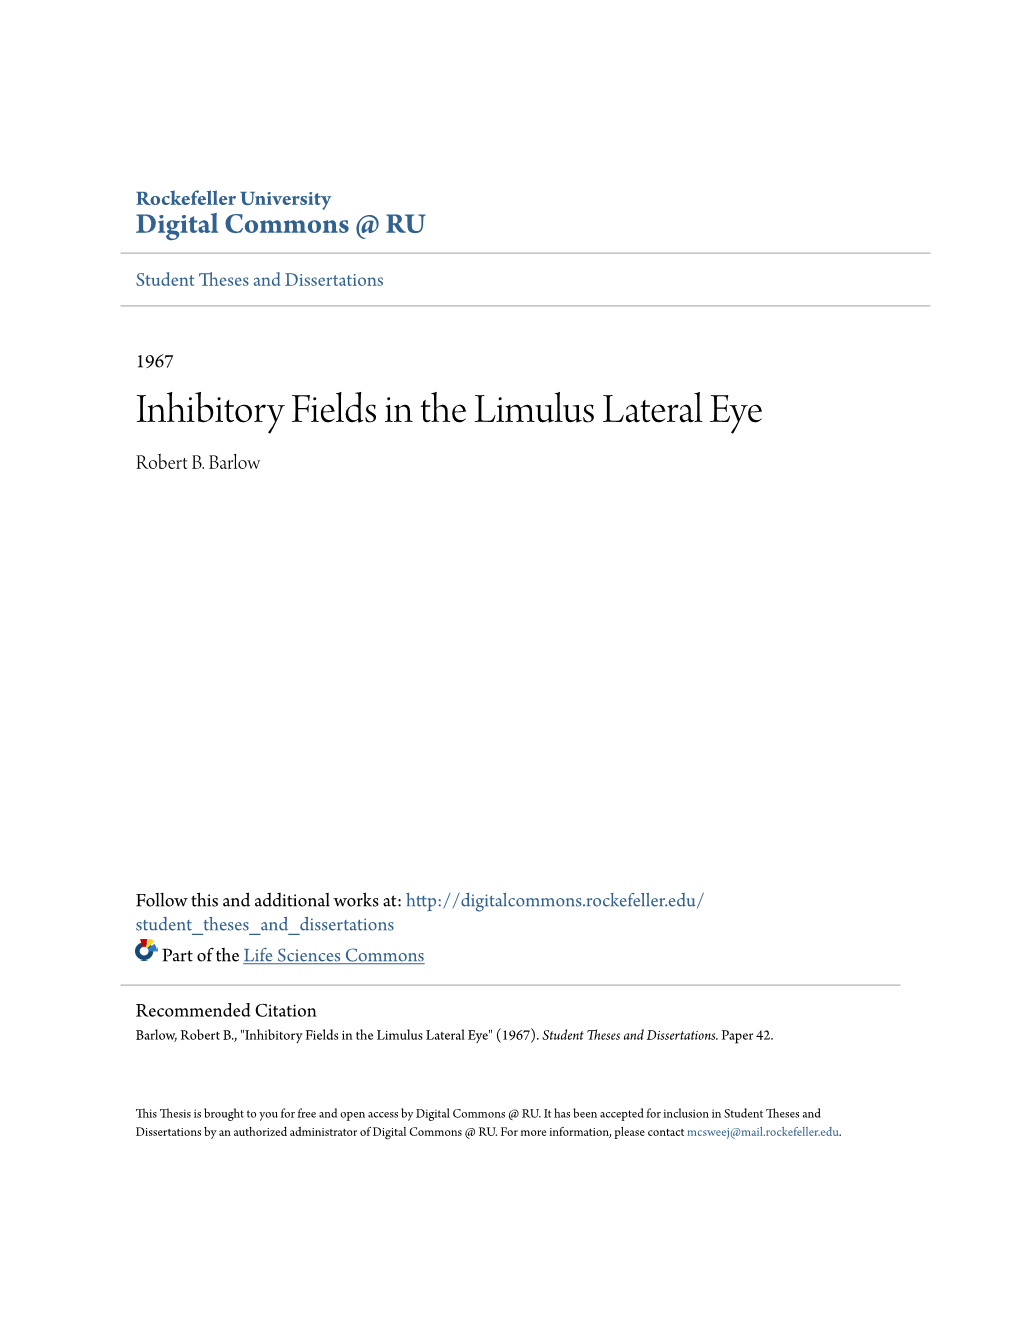 Inhibitory Fields in the Limulus Lateral Eye Robert B